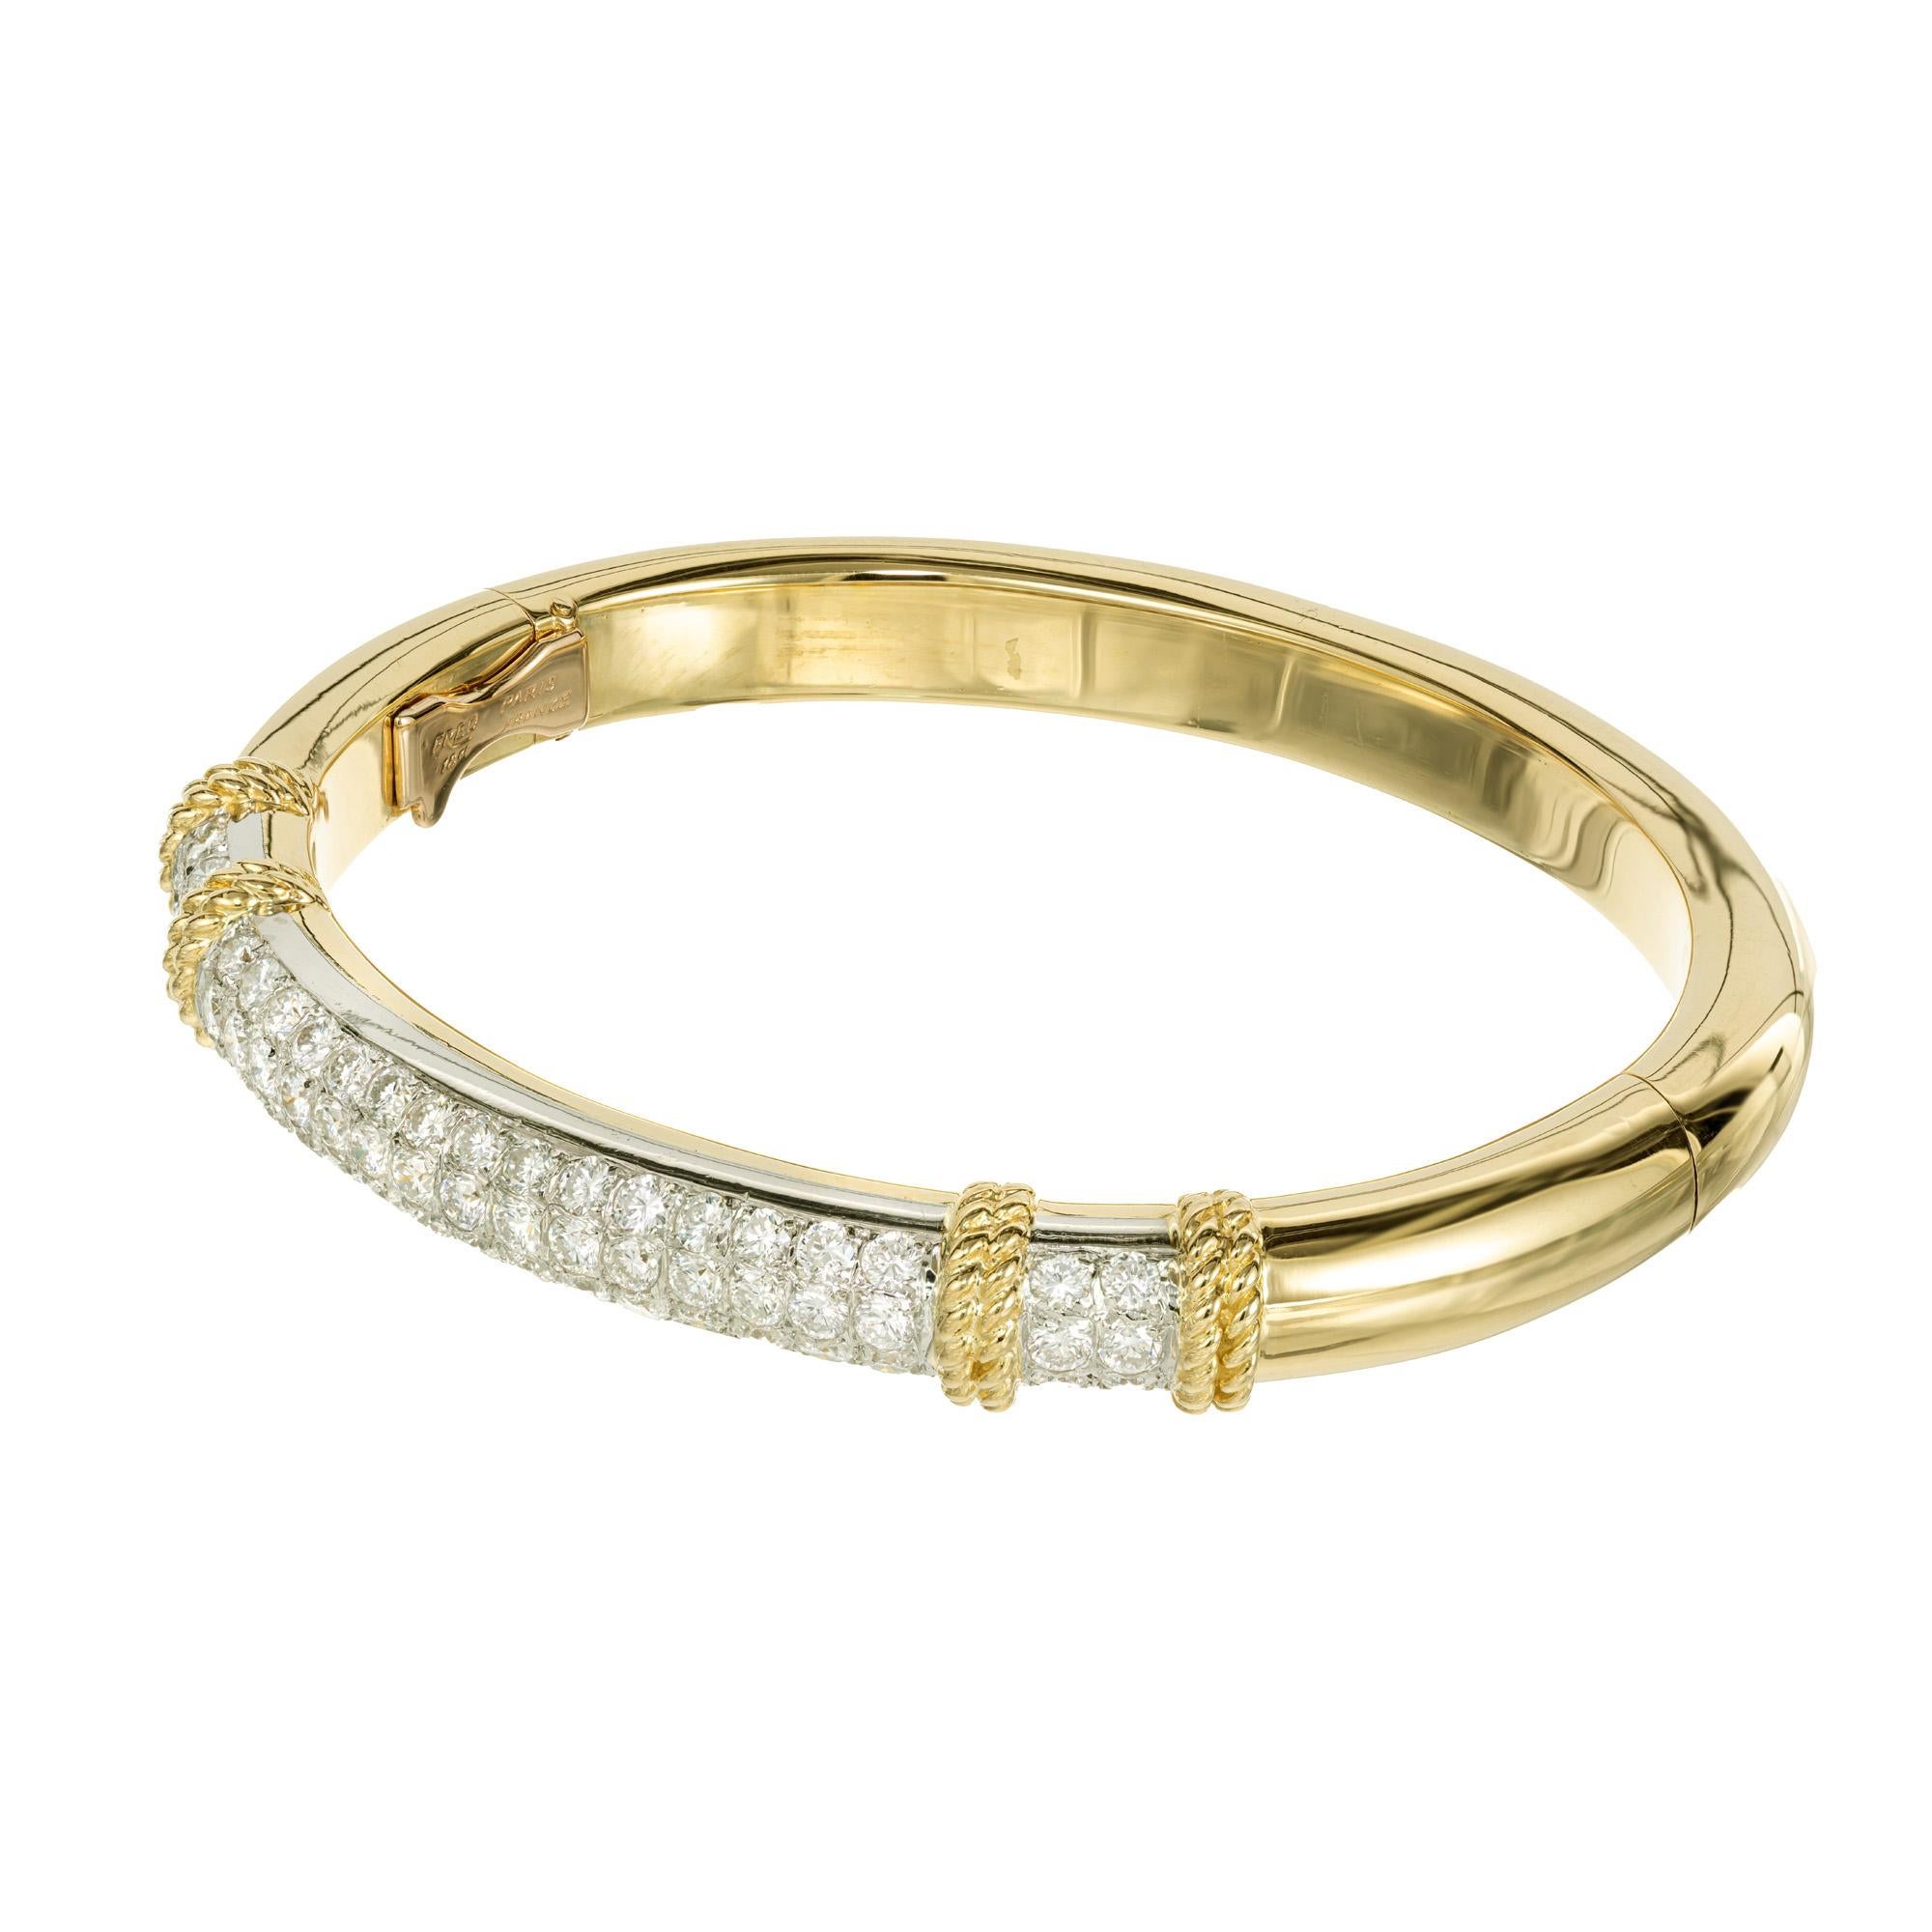 Fred of Paris 2.28 Carat Diamond Two Tone Gold Bangle Bracelet In Good Condition For Sale In Stamford, CT